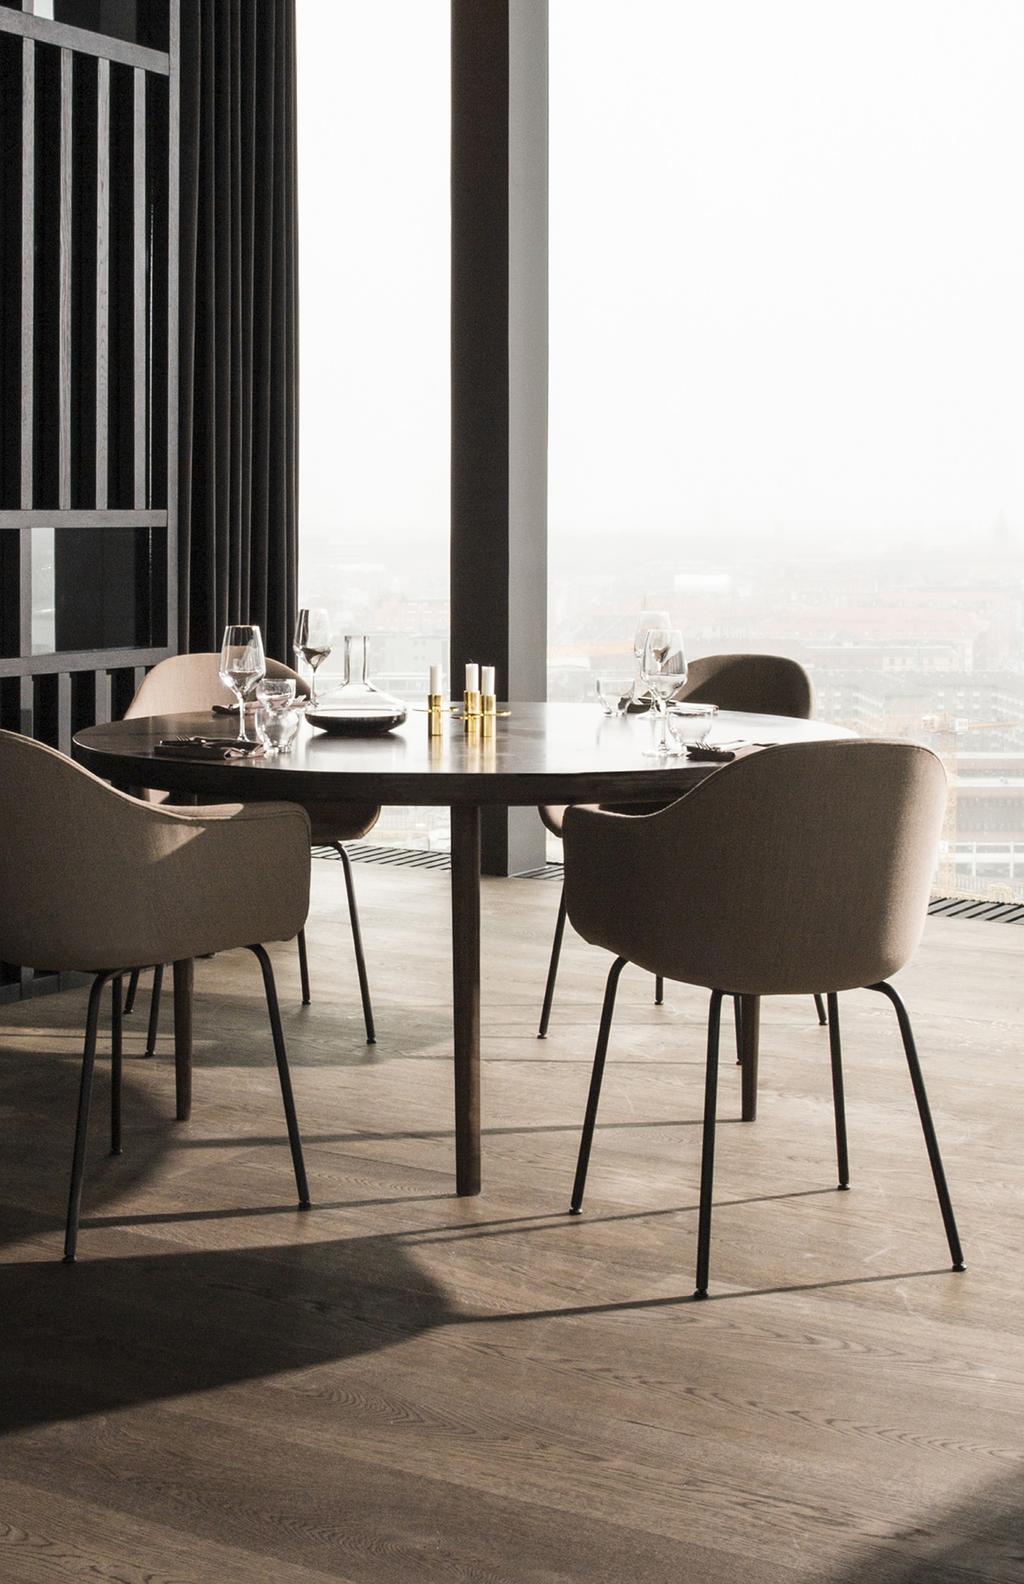 Harbour Chair Conceived during the design process for MENU s new creative destination Menu Space located in Copenhagen s thriving Nordhavn (Northern Harbour) area, the Habour Chair is the result of